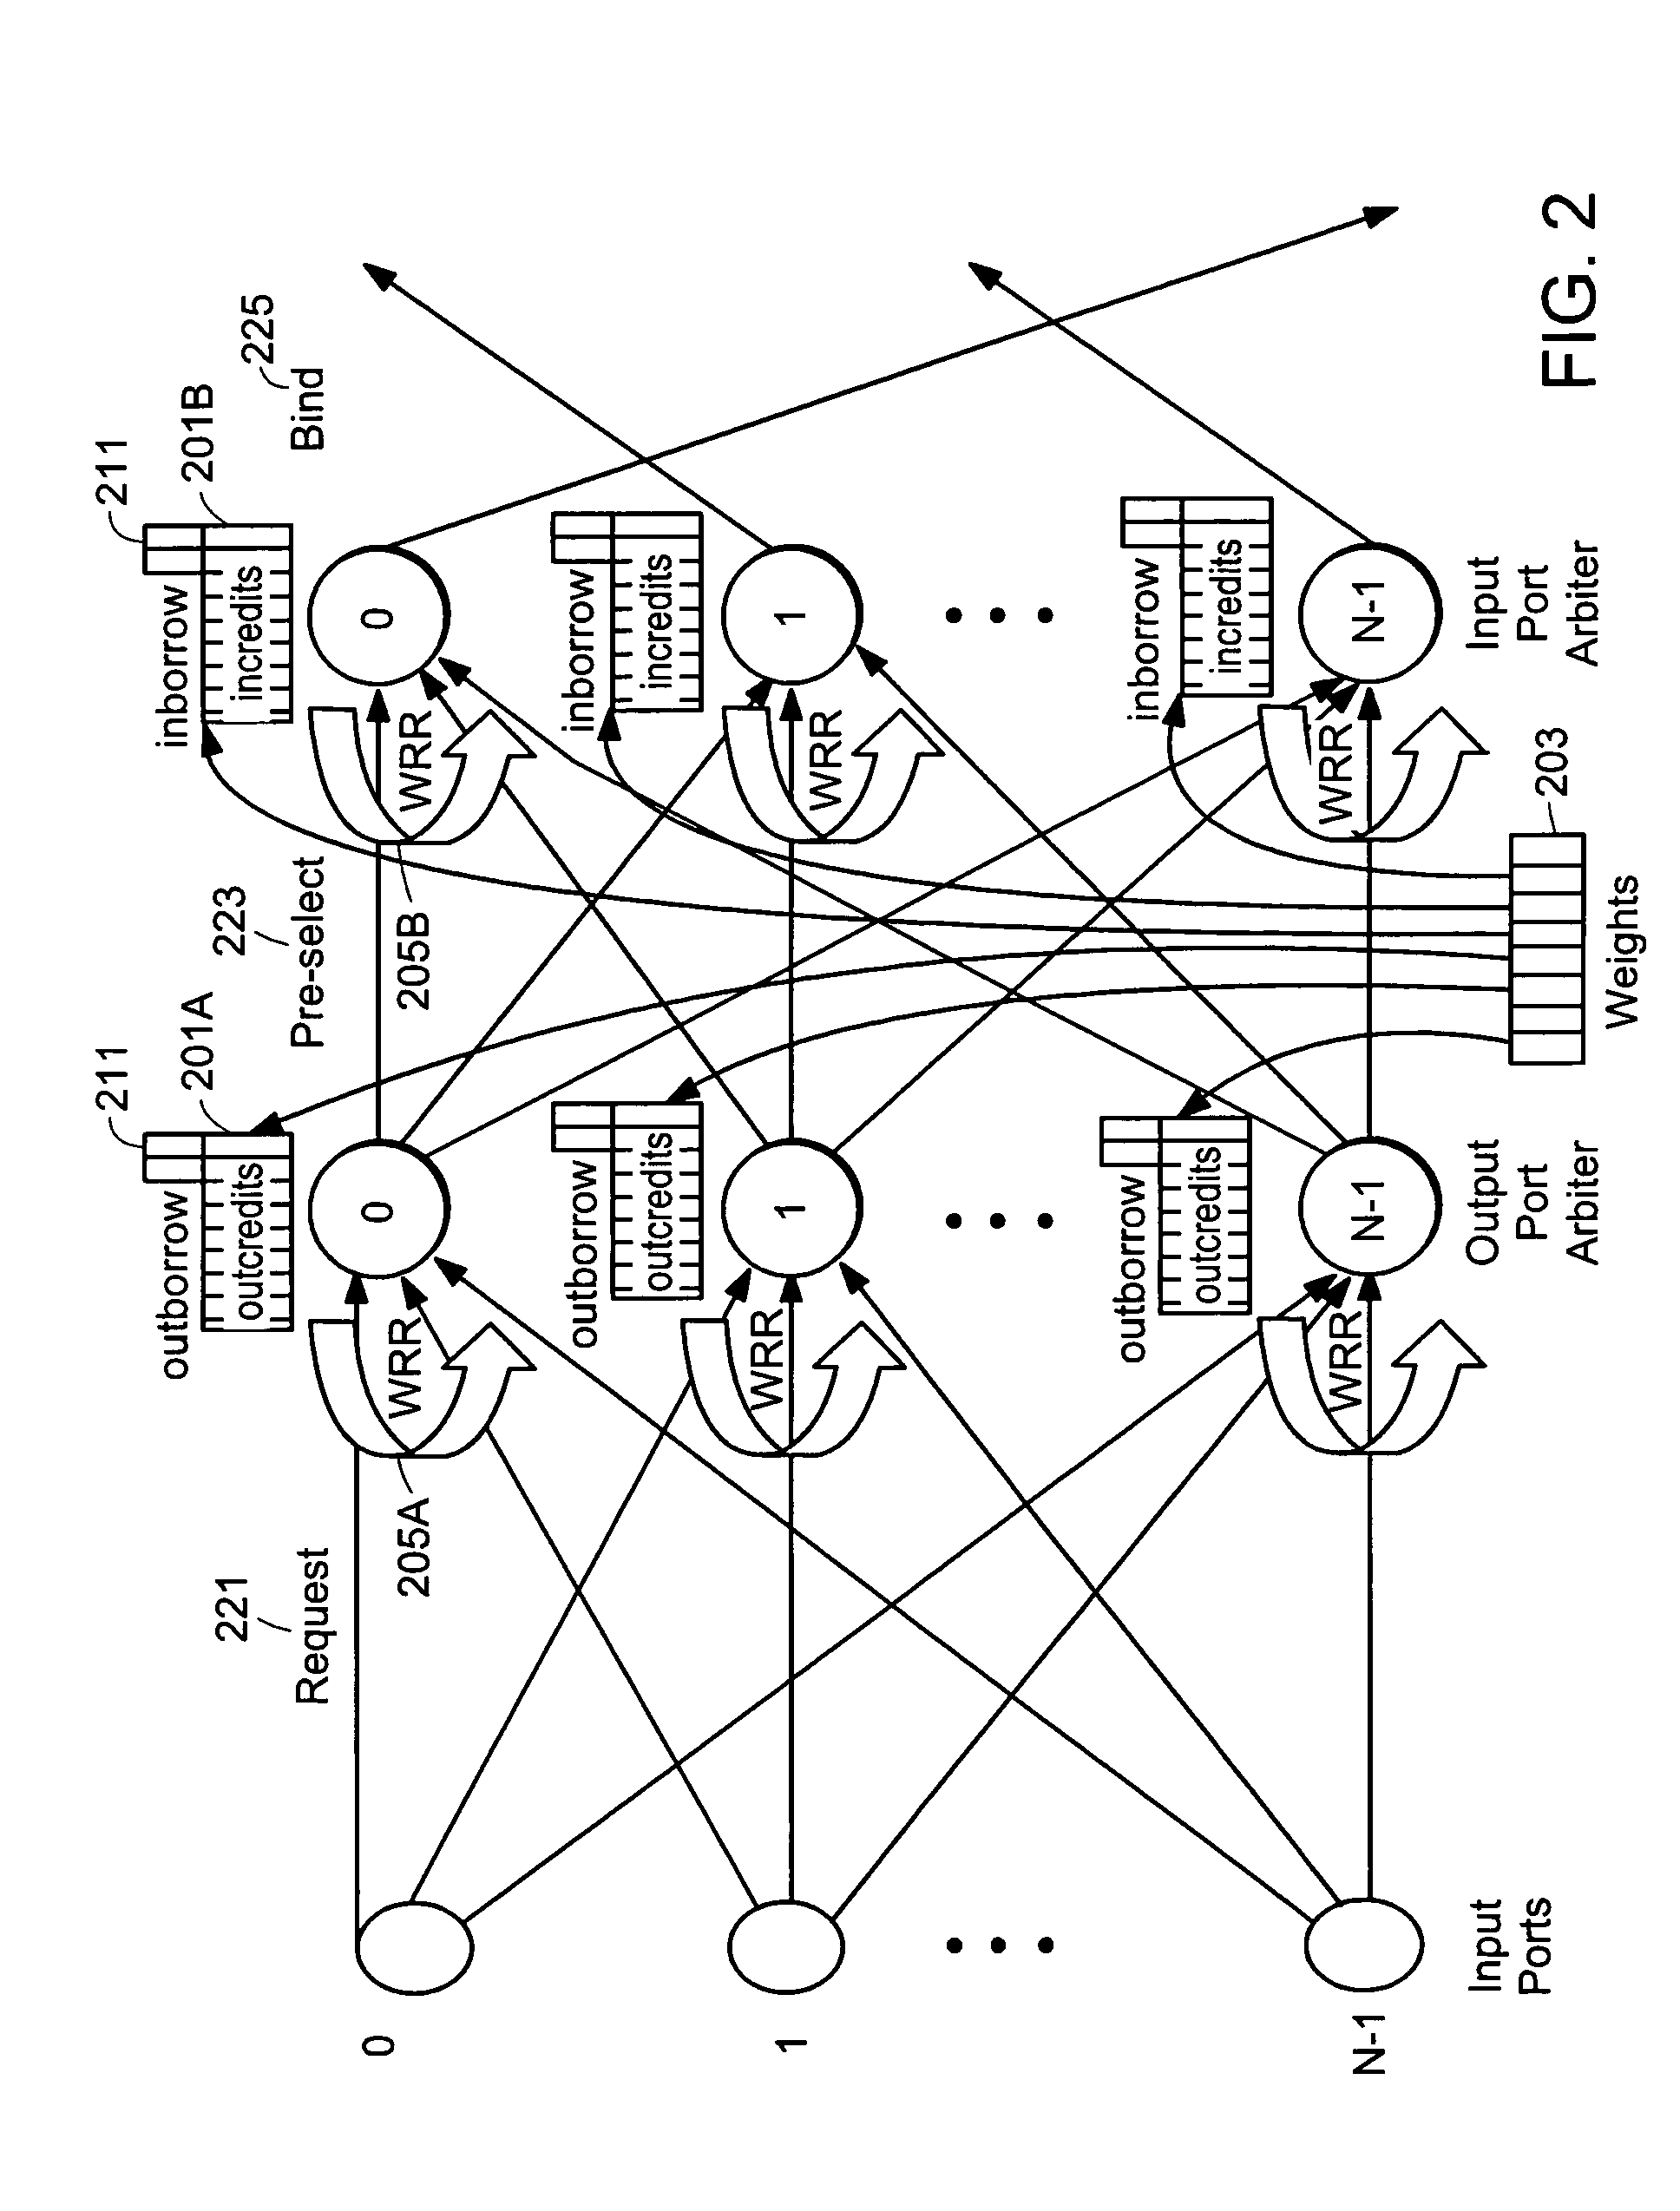 Weighted fair share scheduler for large input-buffered high-speed cross-point packet/cell switches